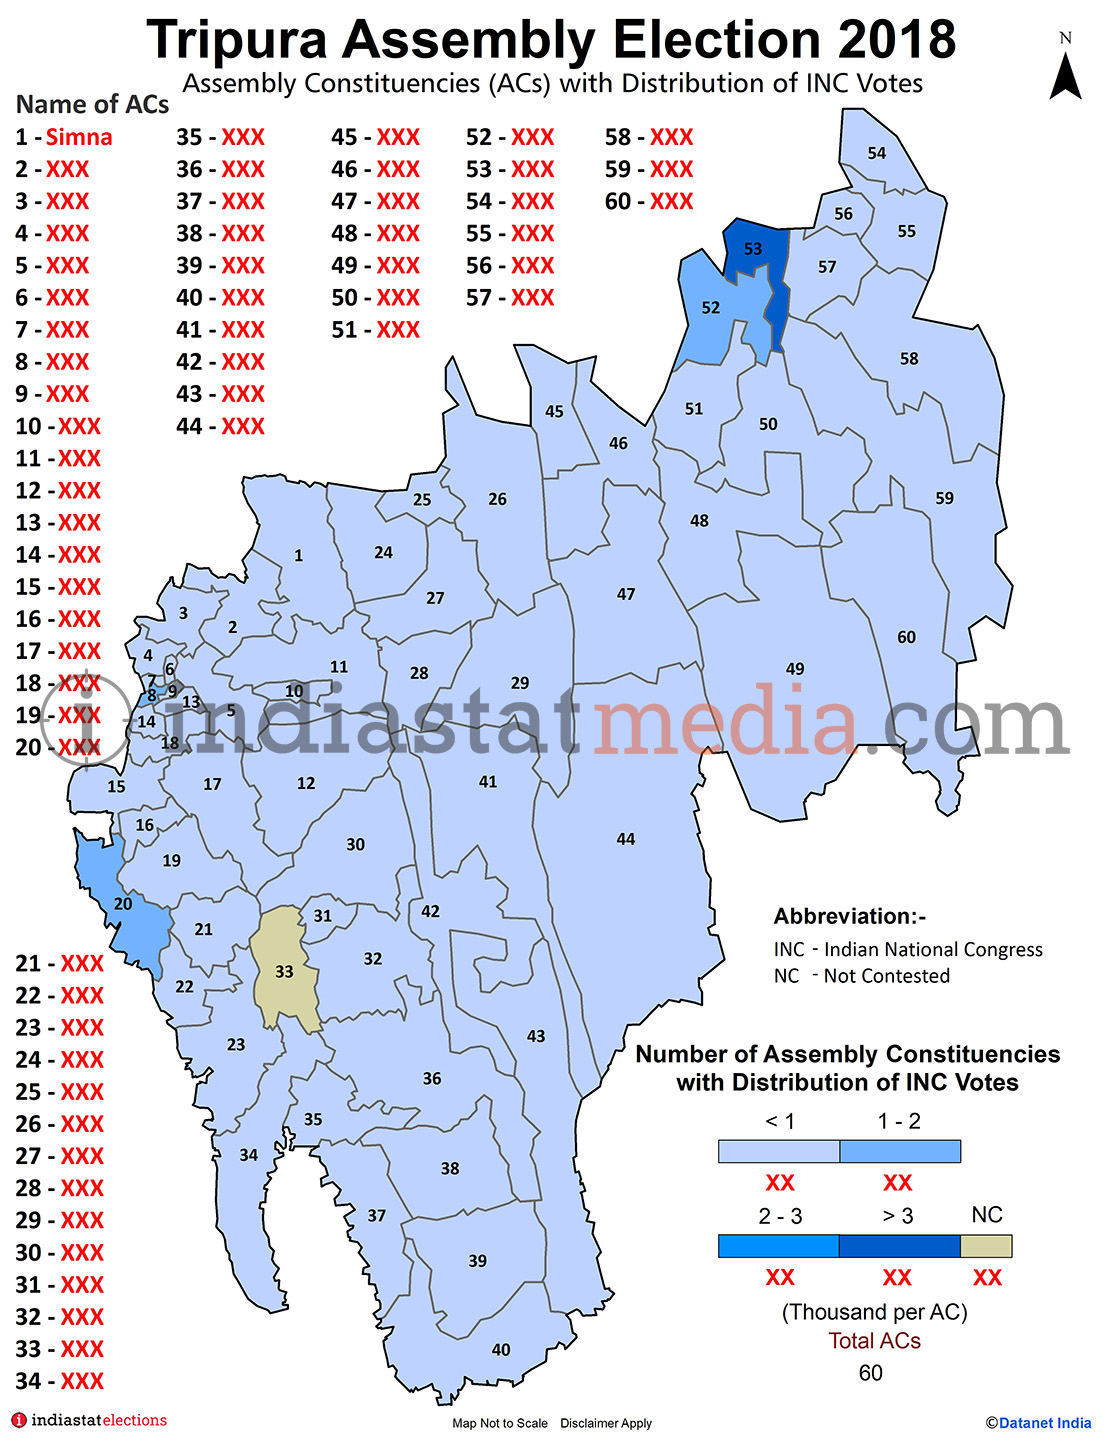 Distribution of INC Votes by Constituencies in Tripura (Assembly Election - 2018)